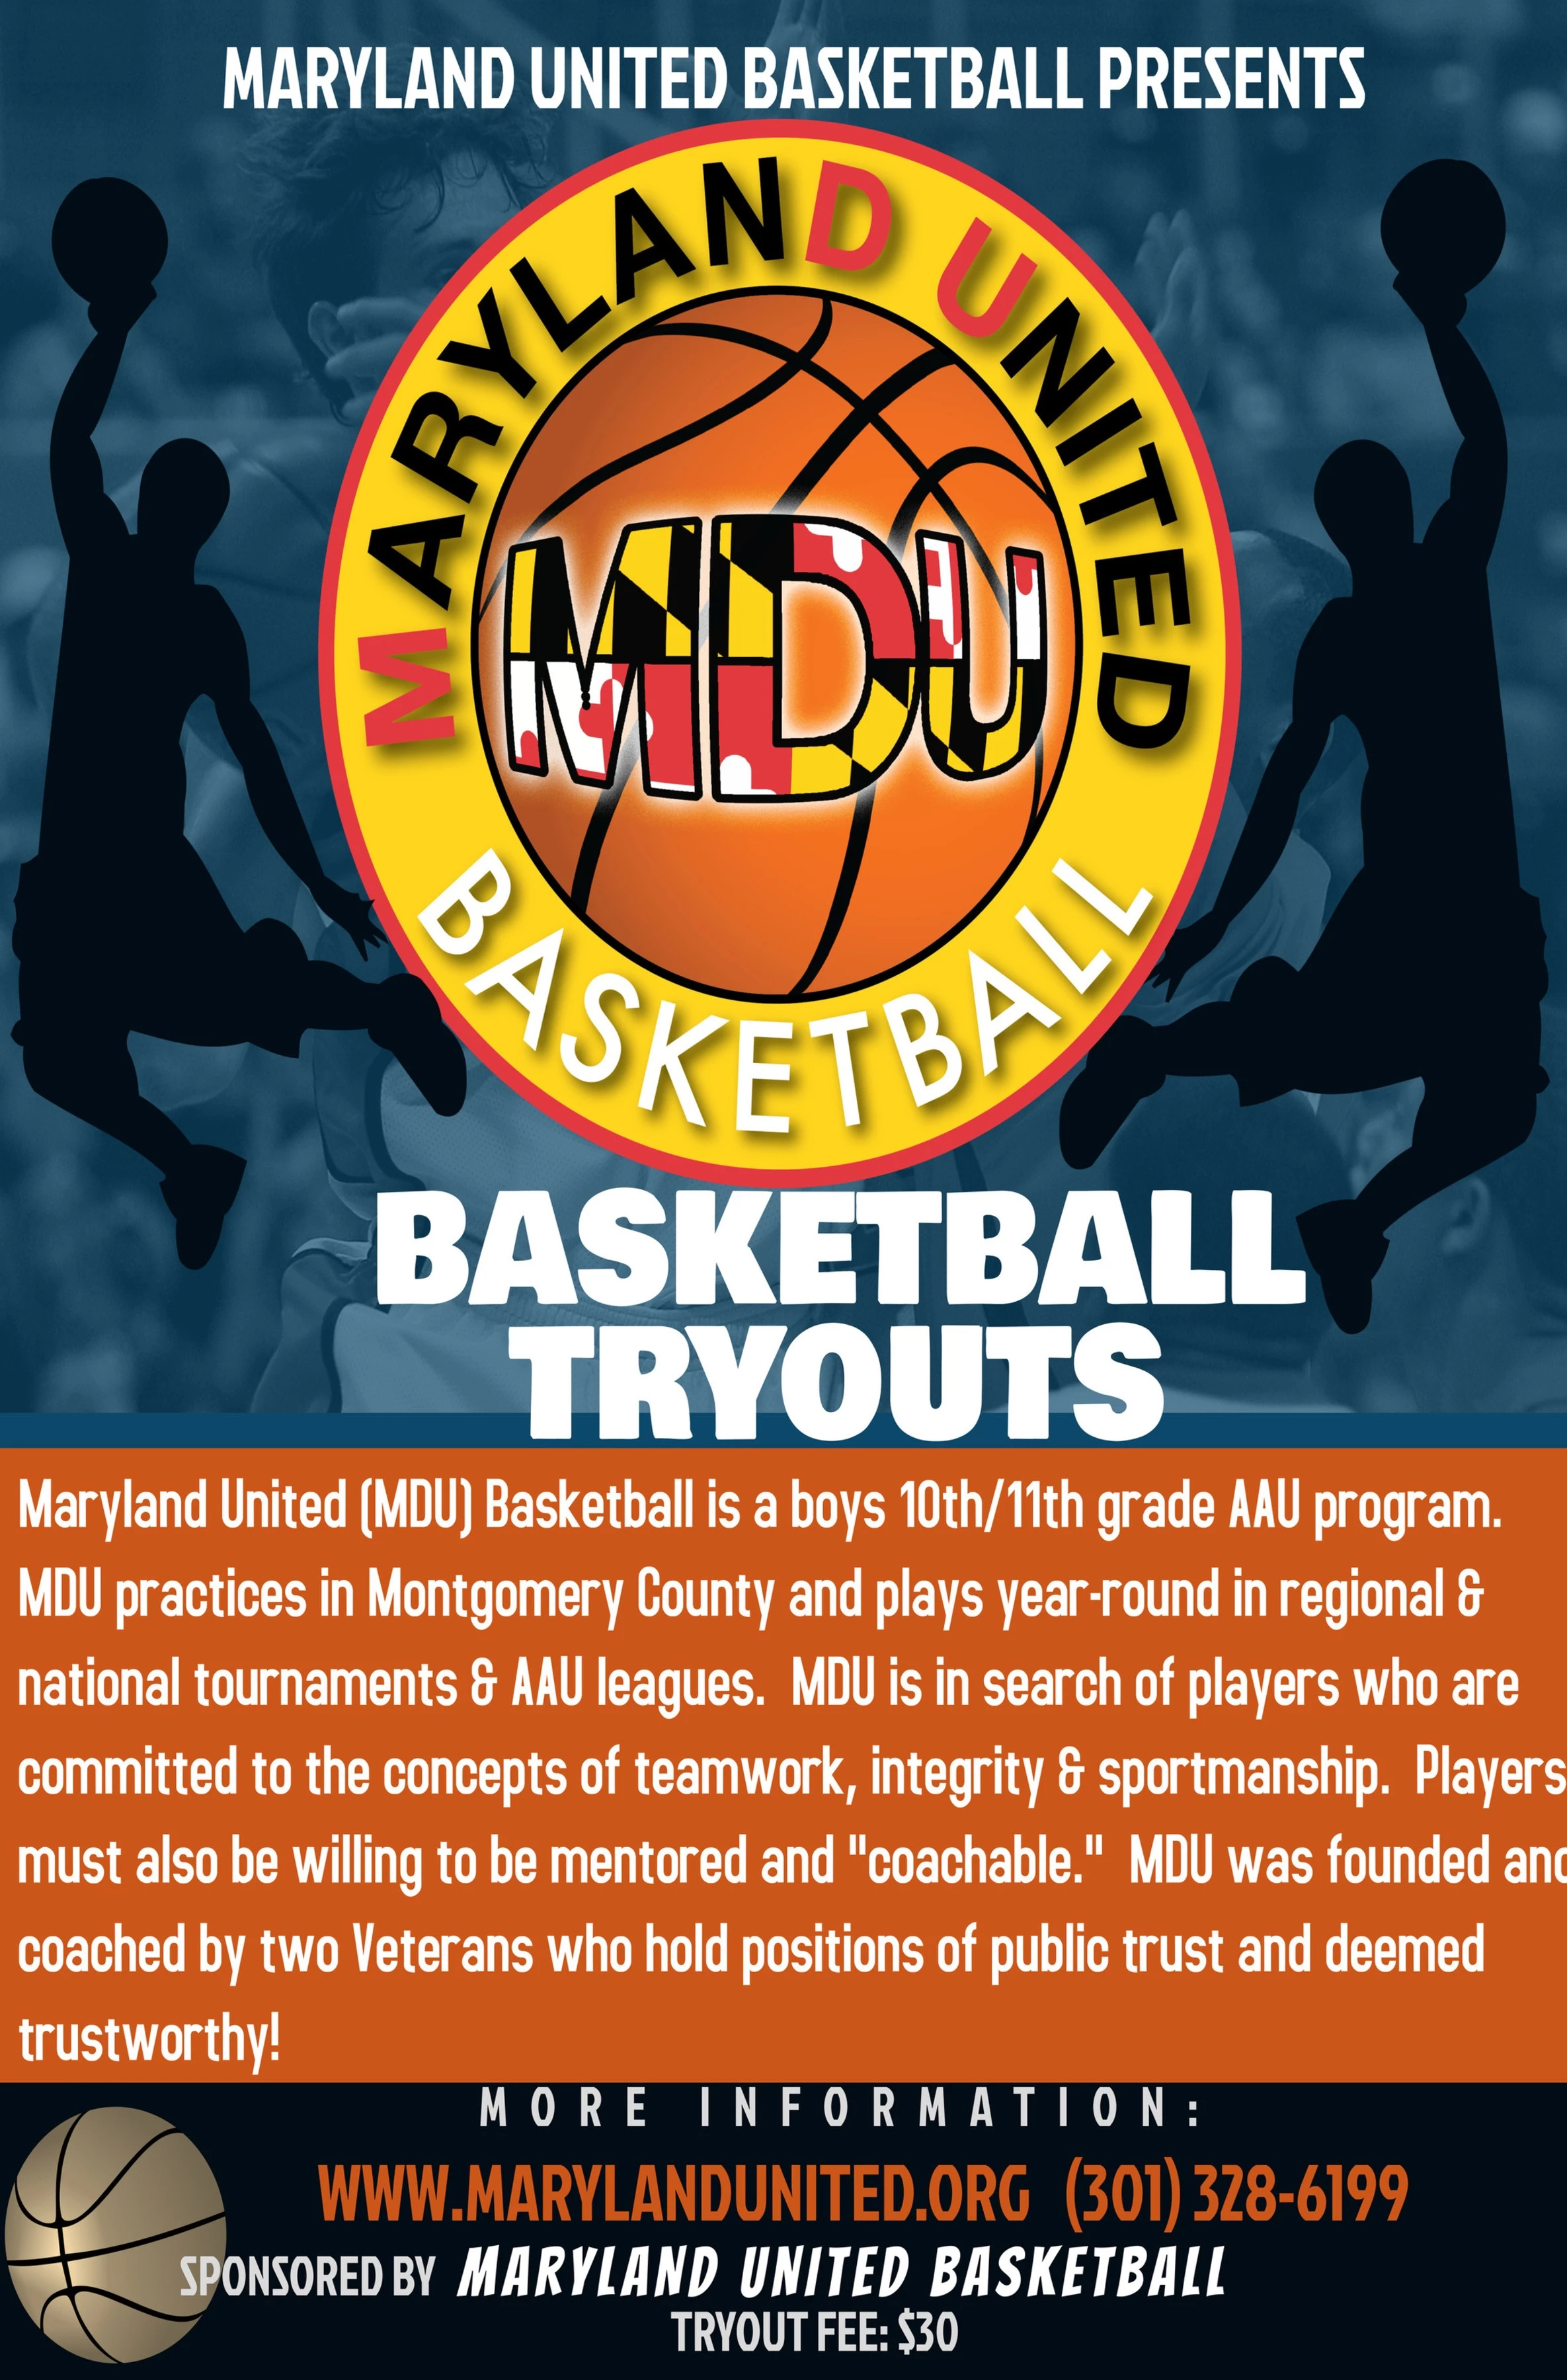 Tryout  Flyer- Maryland United Basketball presents MDU Basketball Tryouts. MDU Basketball is a boys 10th/11th grade AAU program. MDU practices in Montgomery County and plays year-round in regional and national tournaments and AAU leagues. MDU is in search of players who are committed to the concepts of teamwork, integrity and sportmanship. Players must also be willing to be mentored and "coachable". MDU was founded and coached by two Veterans who hold positions of public trust and deemed trustworthy! More information: www.marylandunited.org 301-328-6199. Sponsered by Maryland United Basketball.  Tryout Fee: $30.